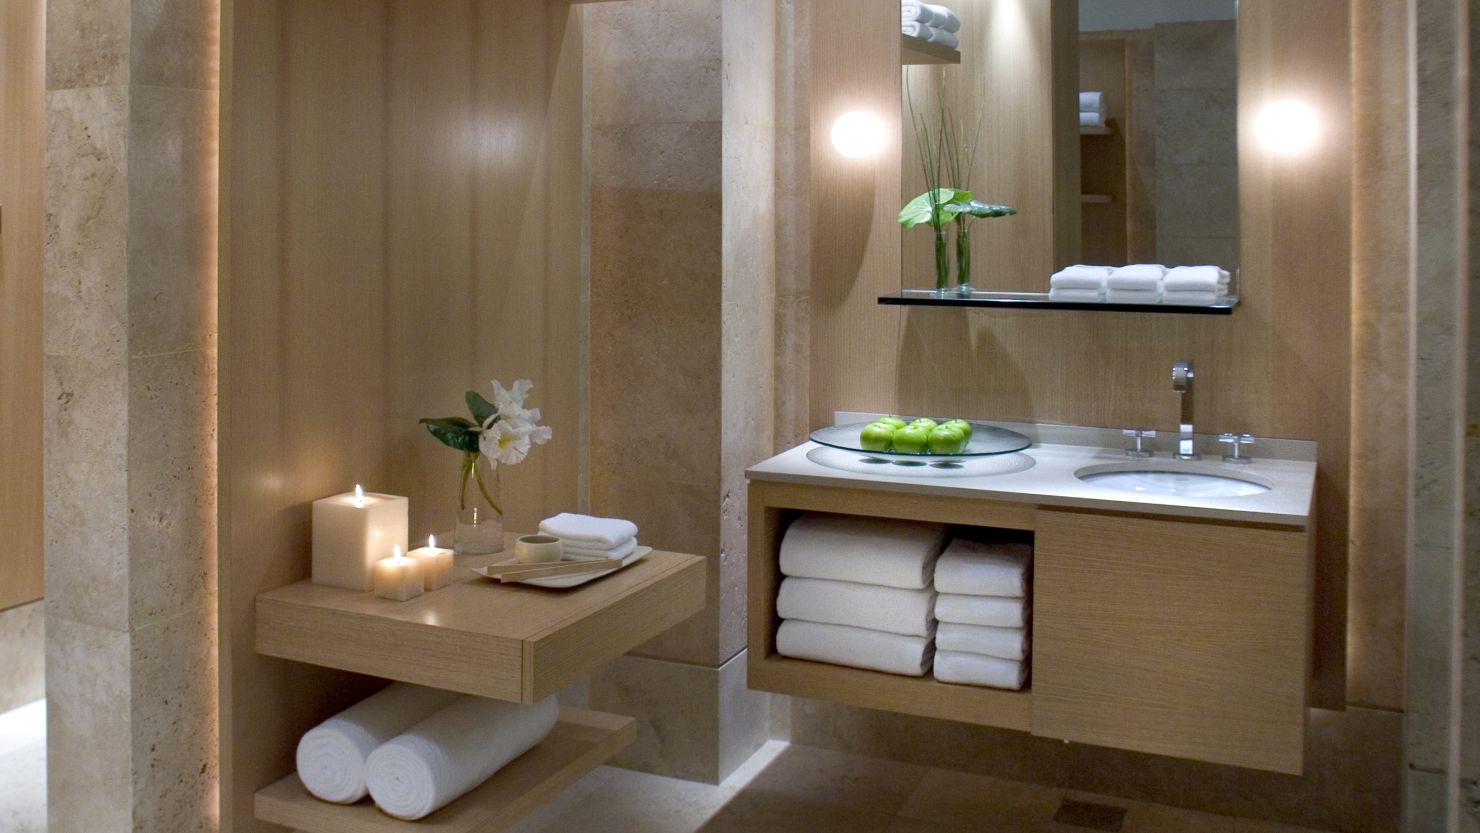 Get Hotel-Level Towels for Your Bathroom on